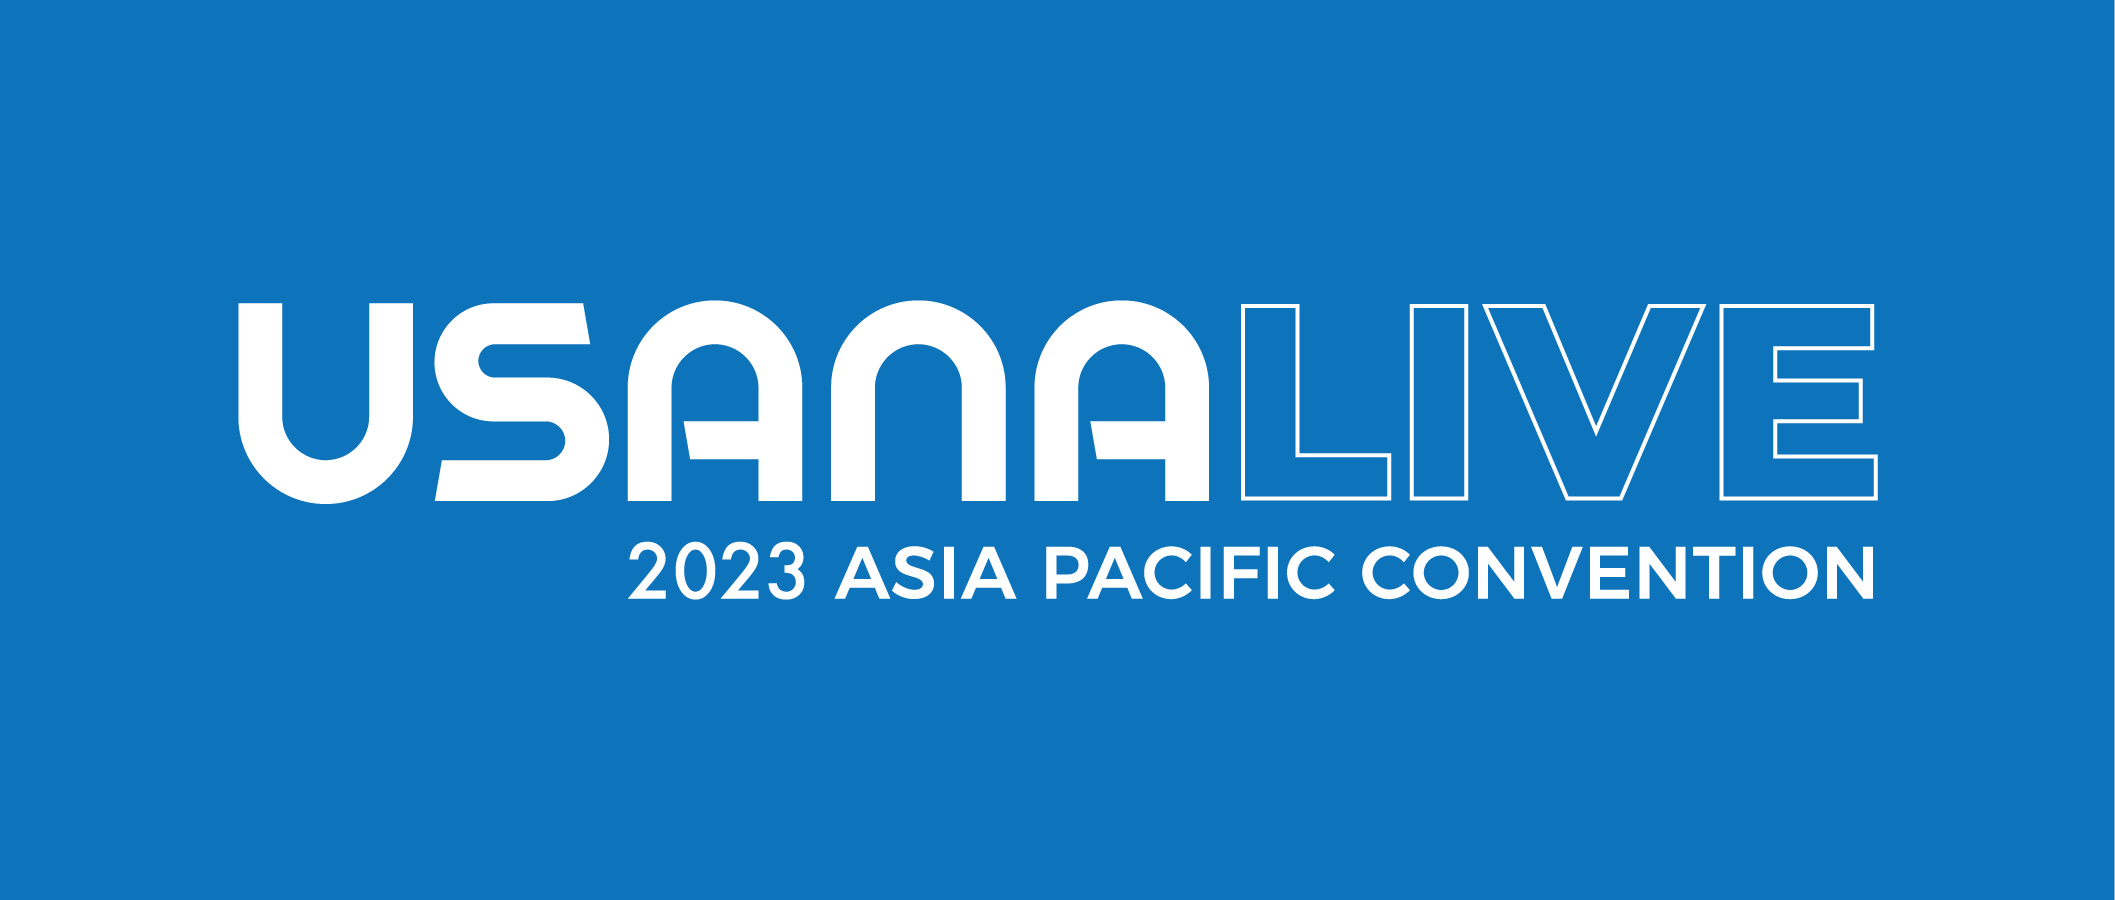 USANA Live 2023 Asia Pacific Convention